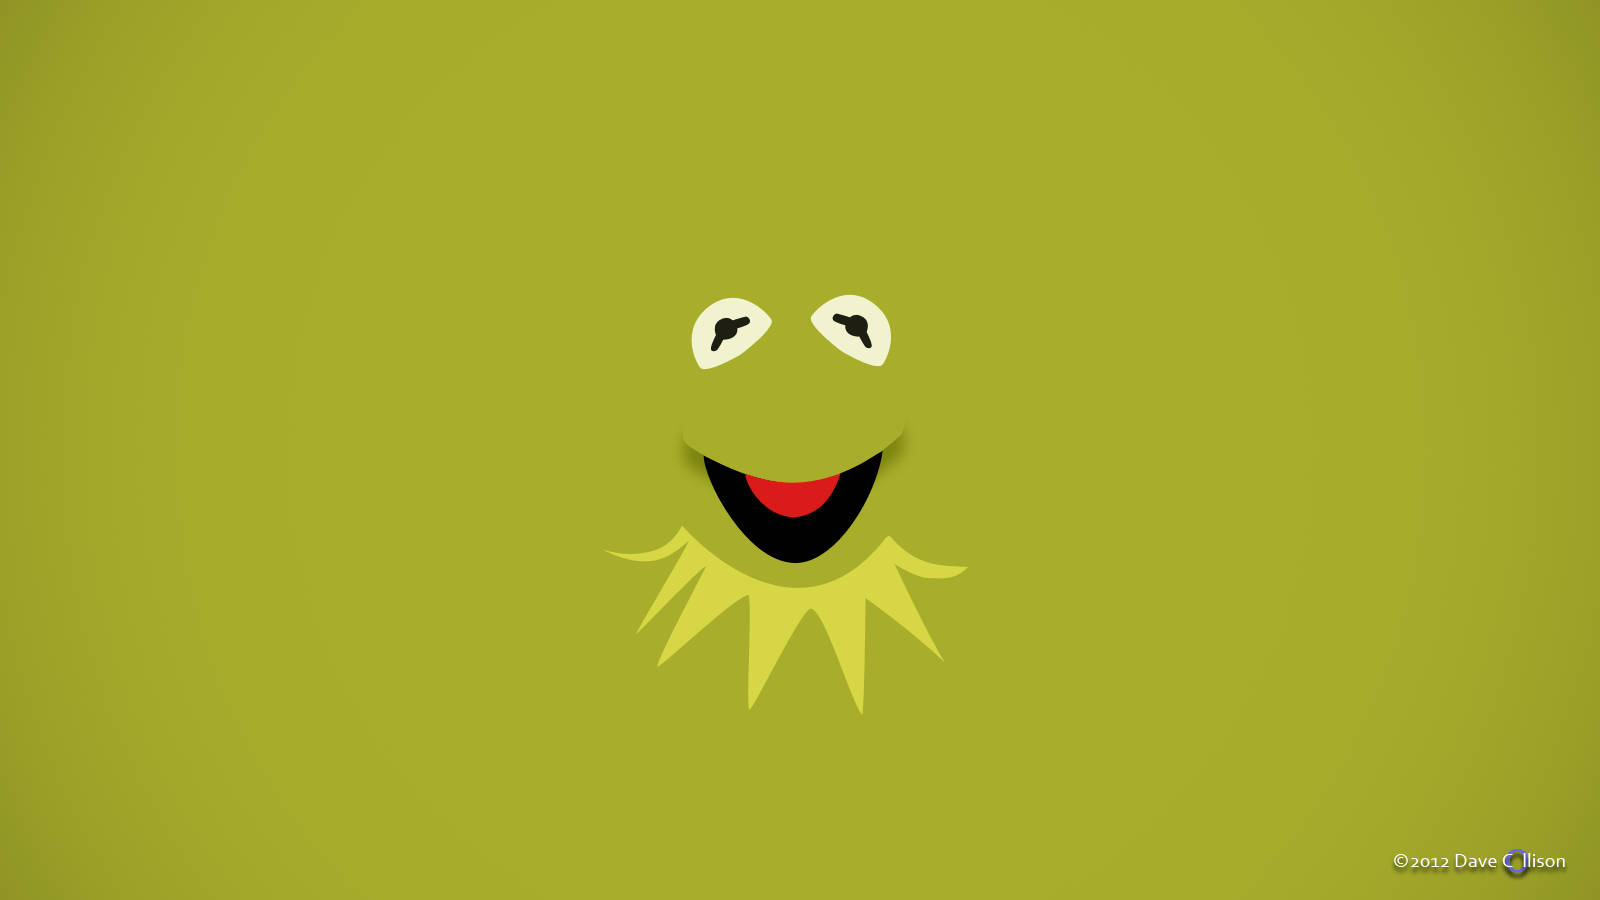 Kermit The Frog On A Bicycle In A Joyful Ride Wallpaper